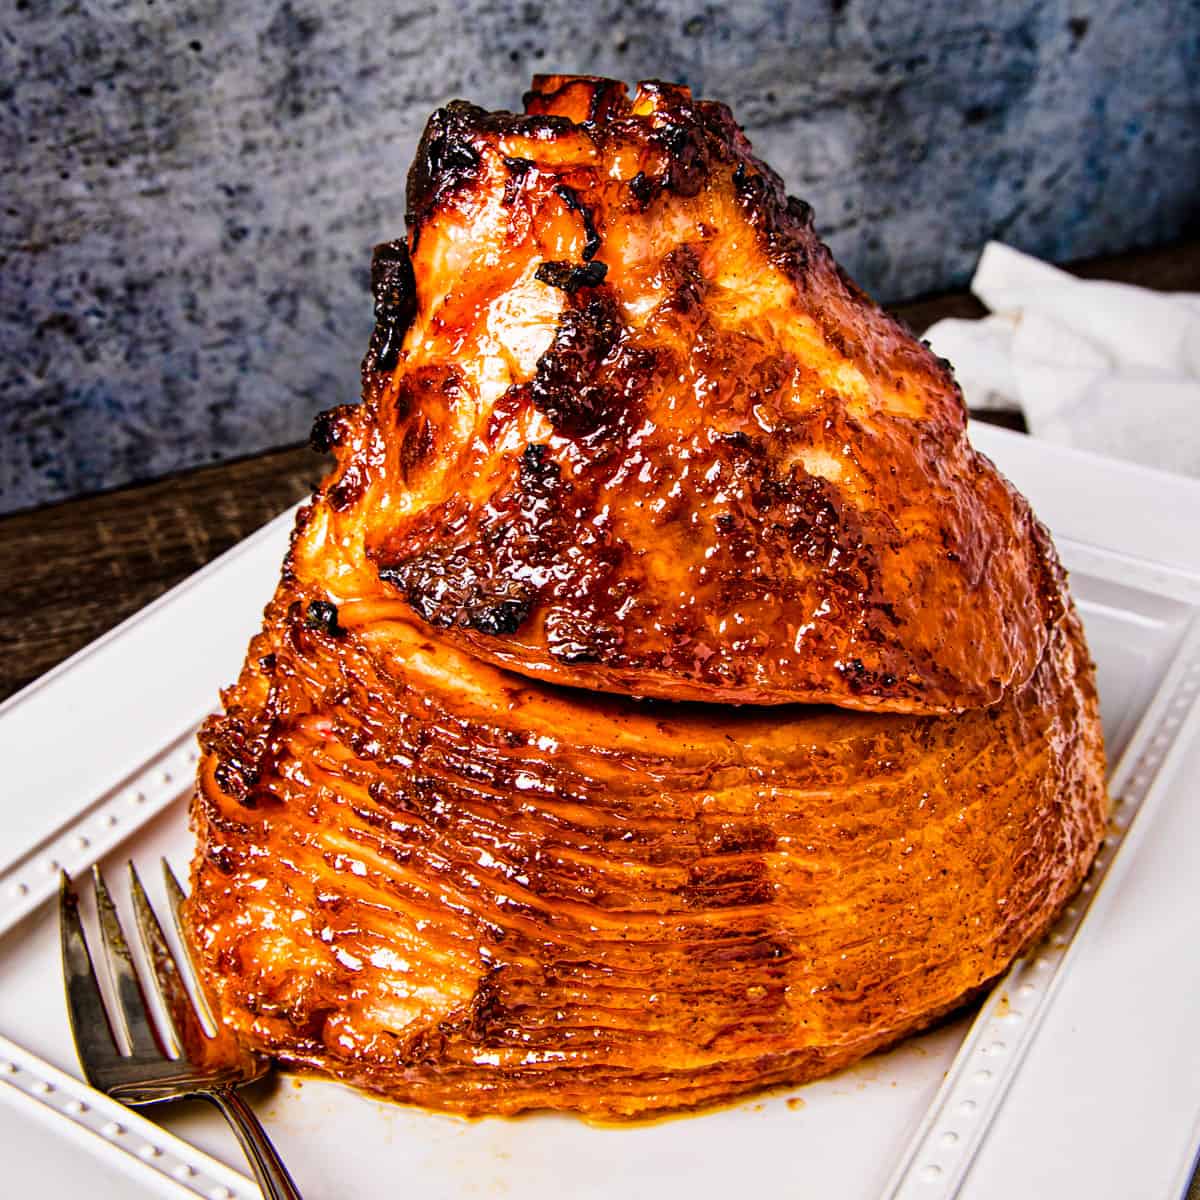 A double smoked spiral sliced ham served on a large platter.